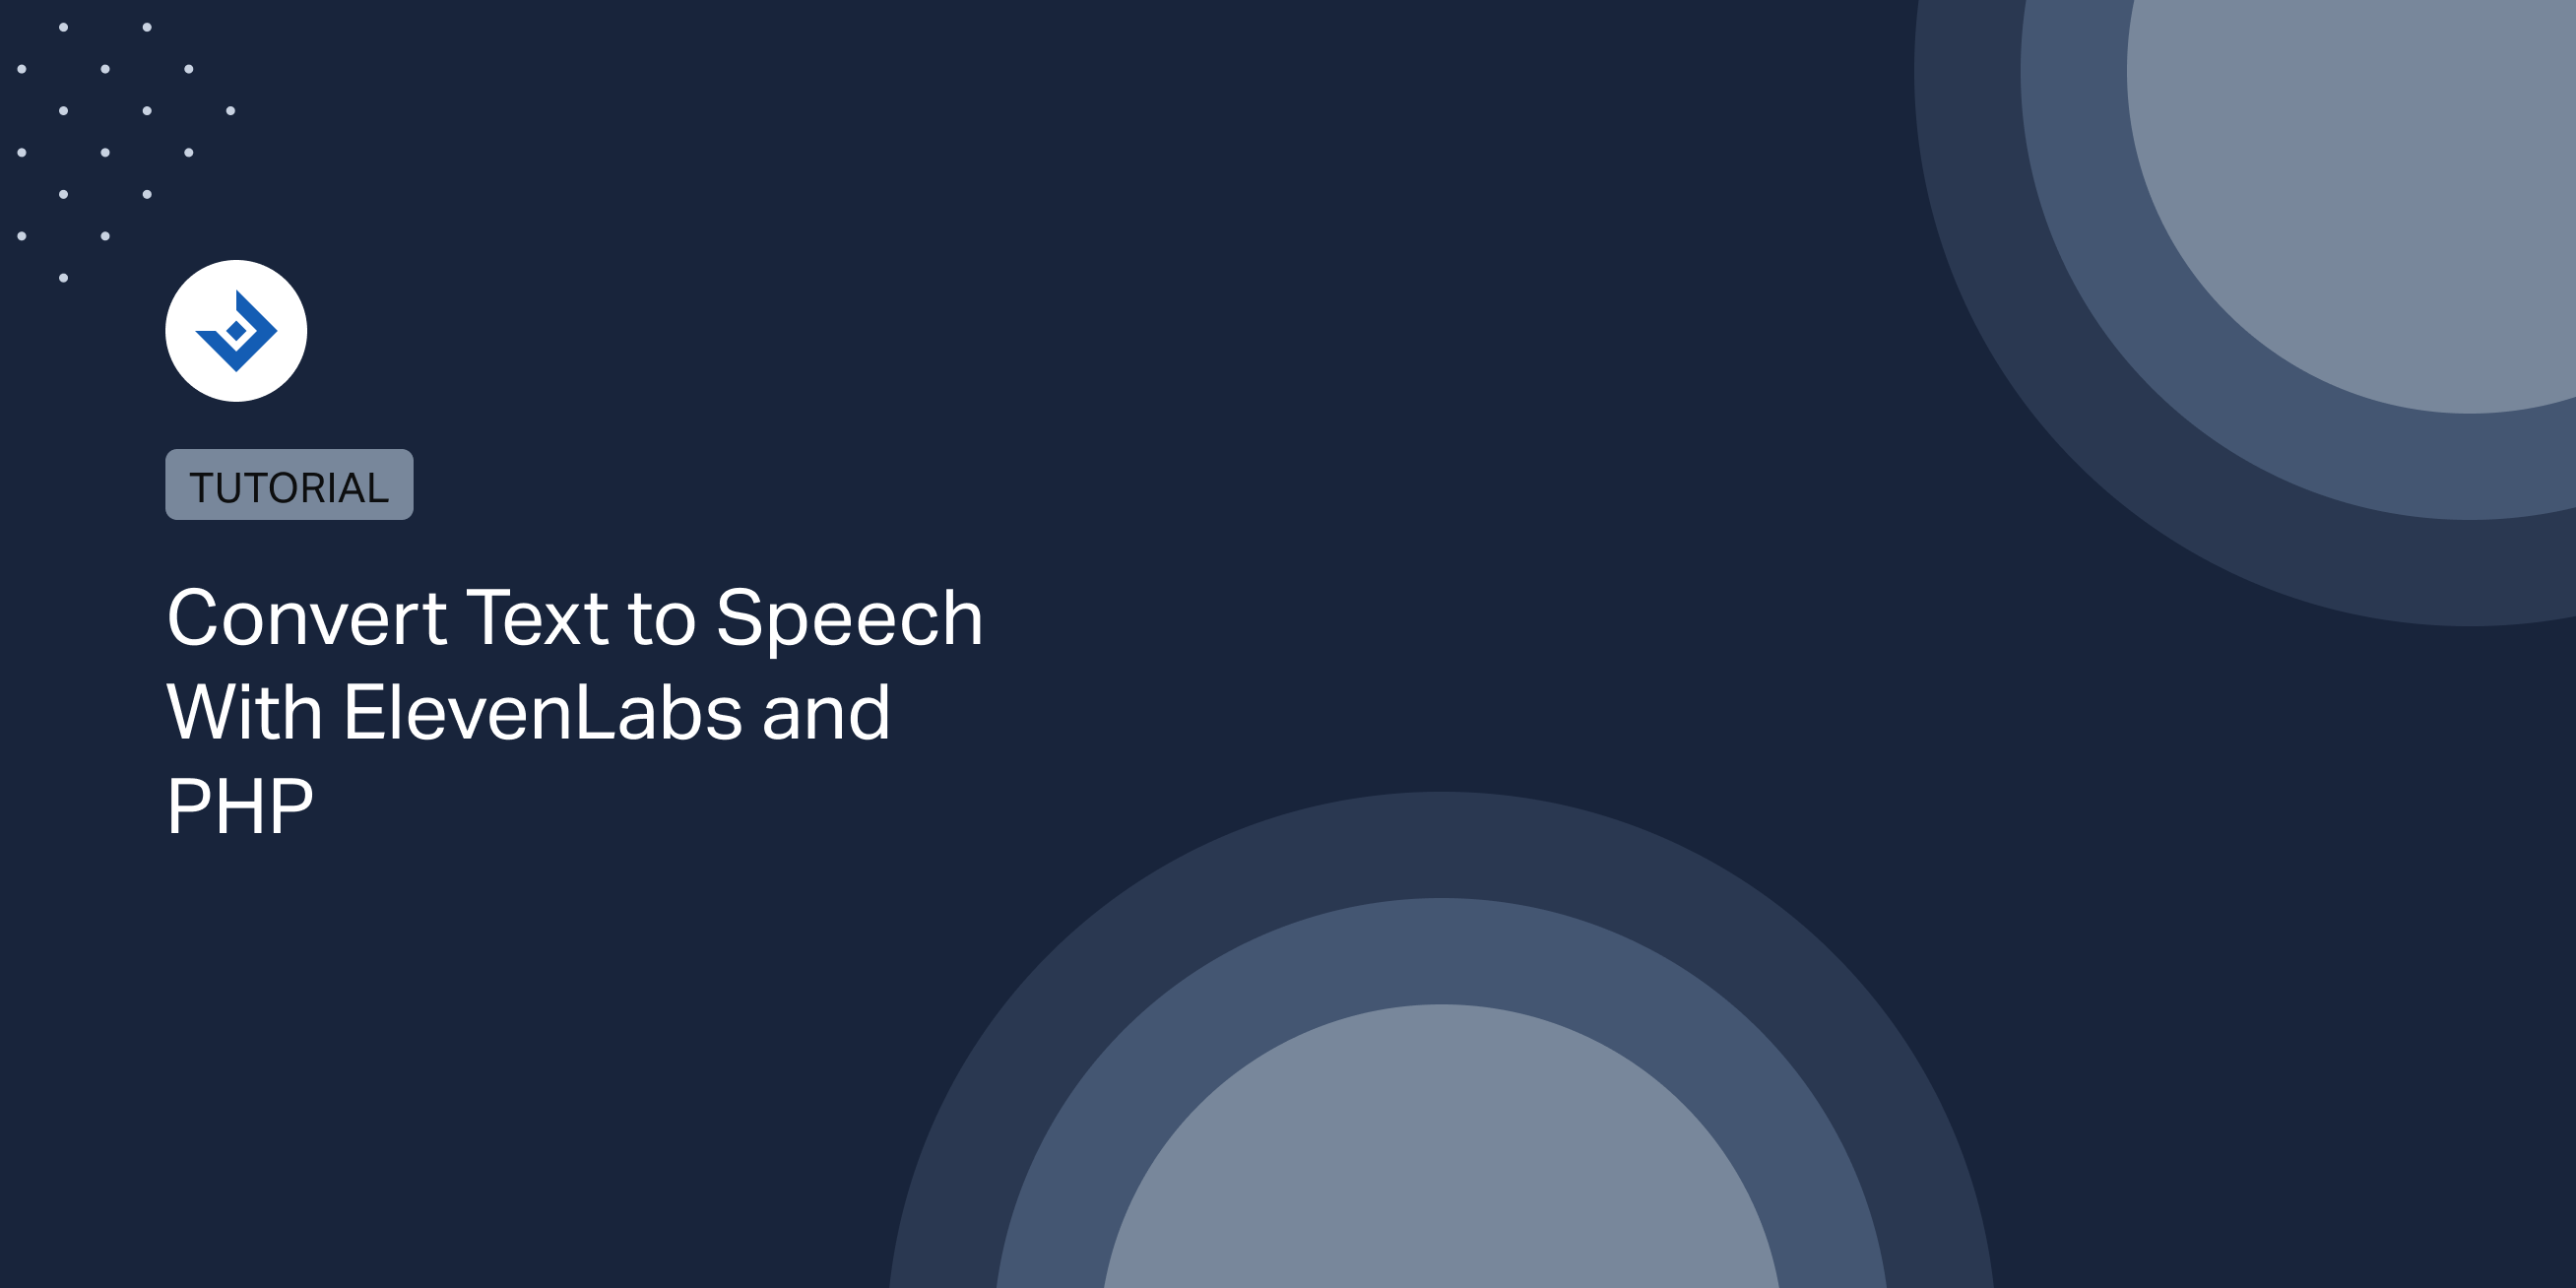 Convert Text to Speech With ElevenLabs and PHP